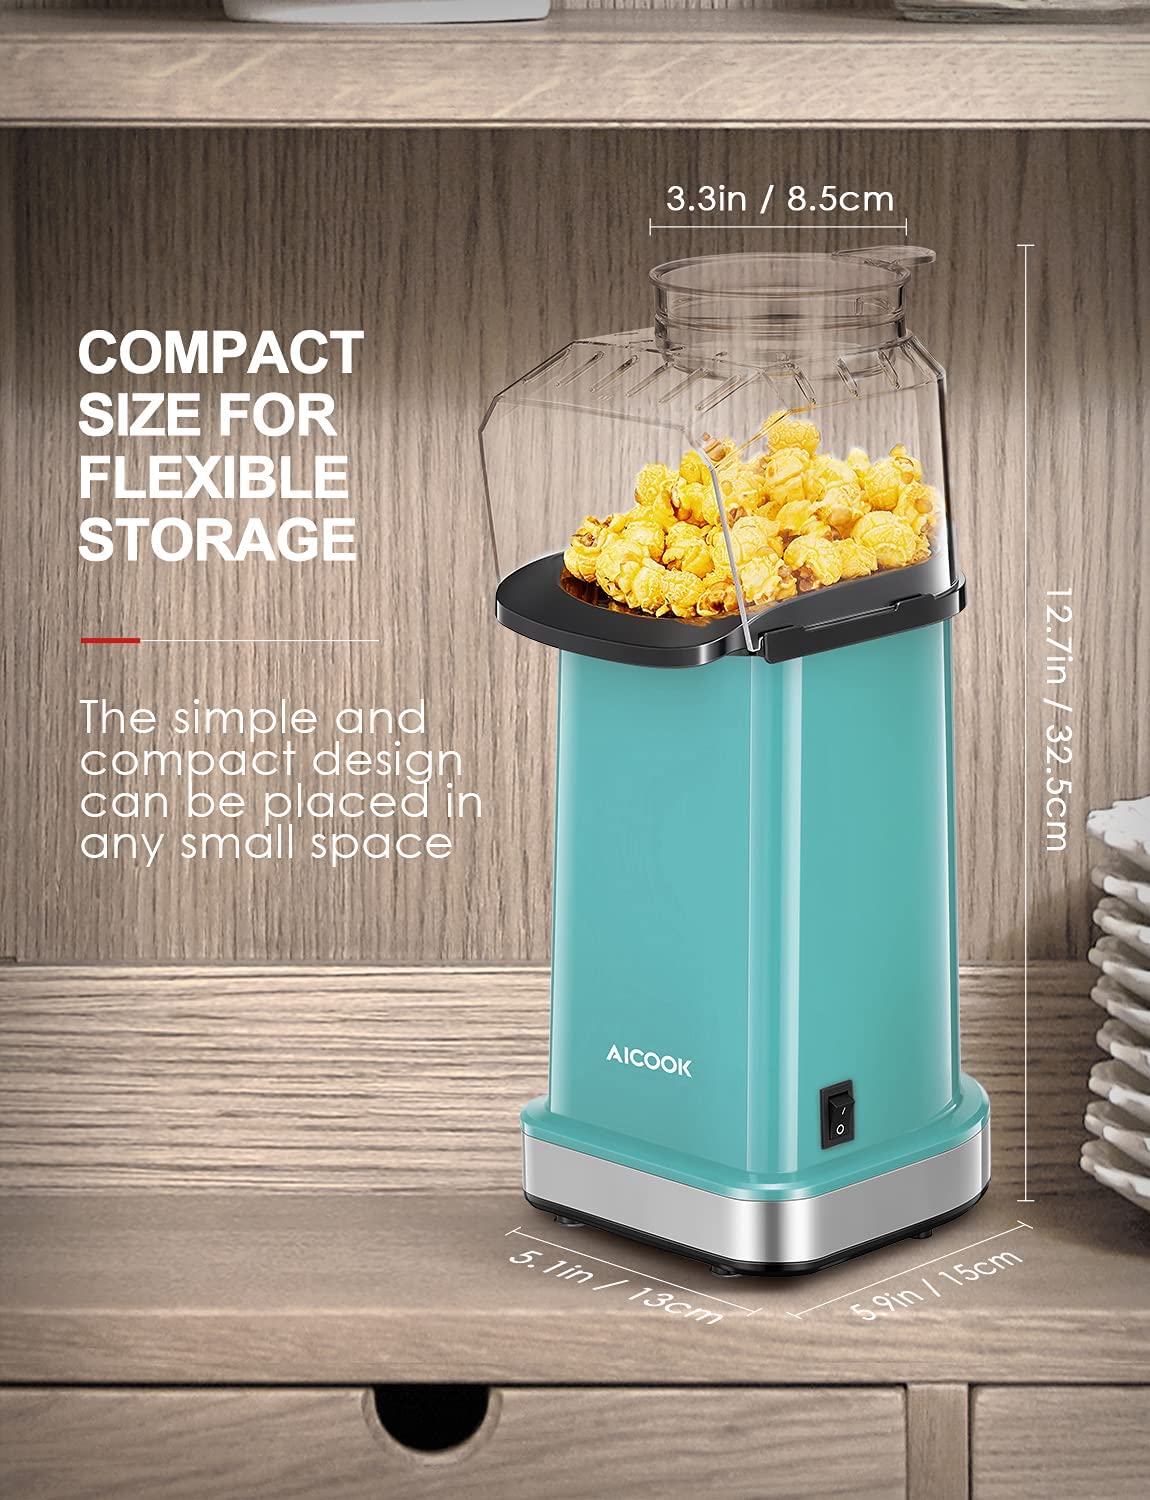 1200W Hot Air Popper Popcorn Maker with Protaction Cover and Measuring Cup  Electric Machine Kitchen Supplies CLH@8 - AliExpress